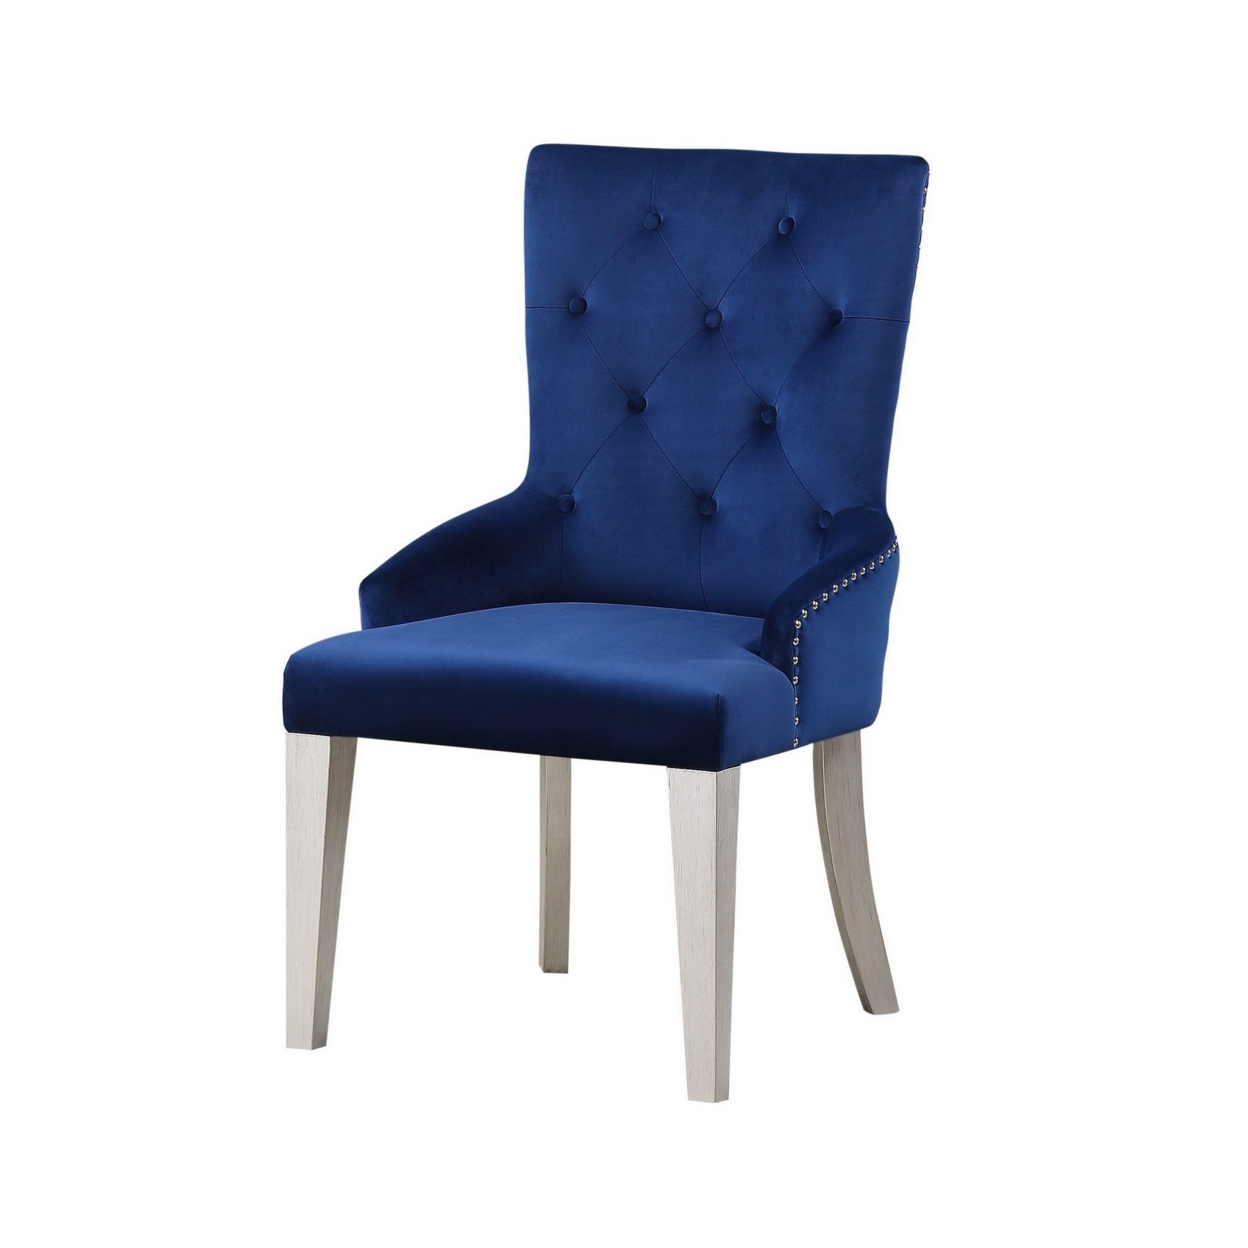 Side Chair With Button Tufted Back And Tapered Legs, Blue- Saltoro Sherpi